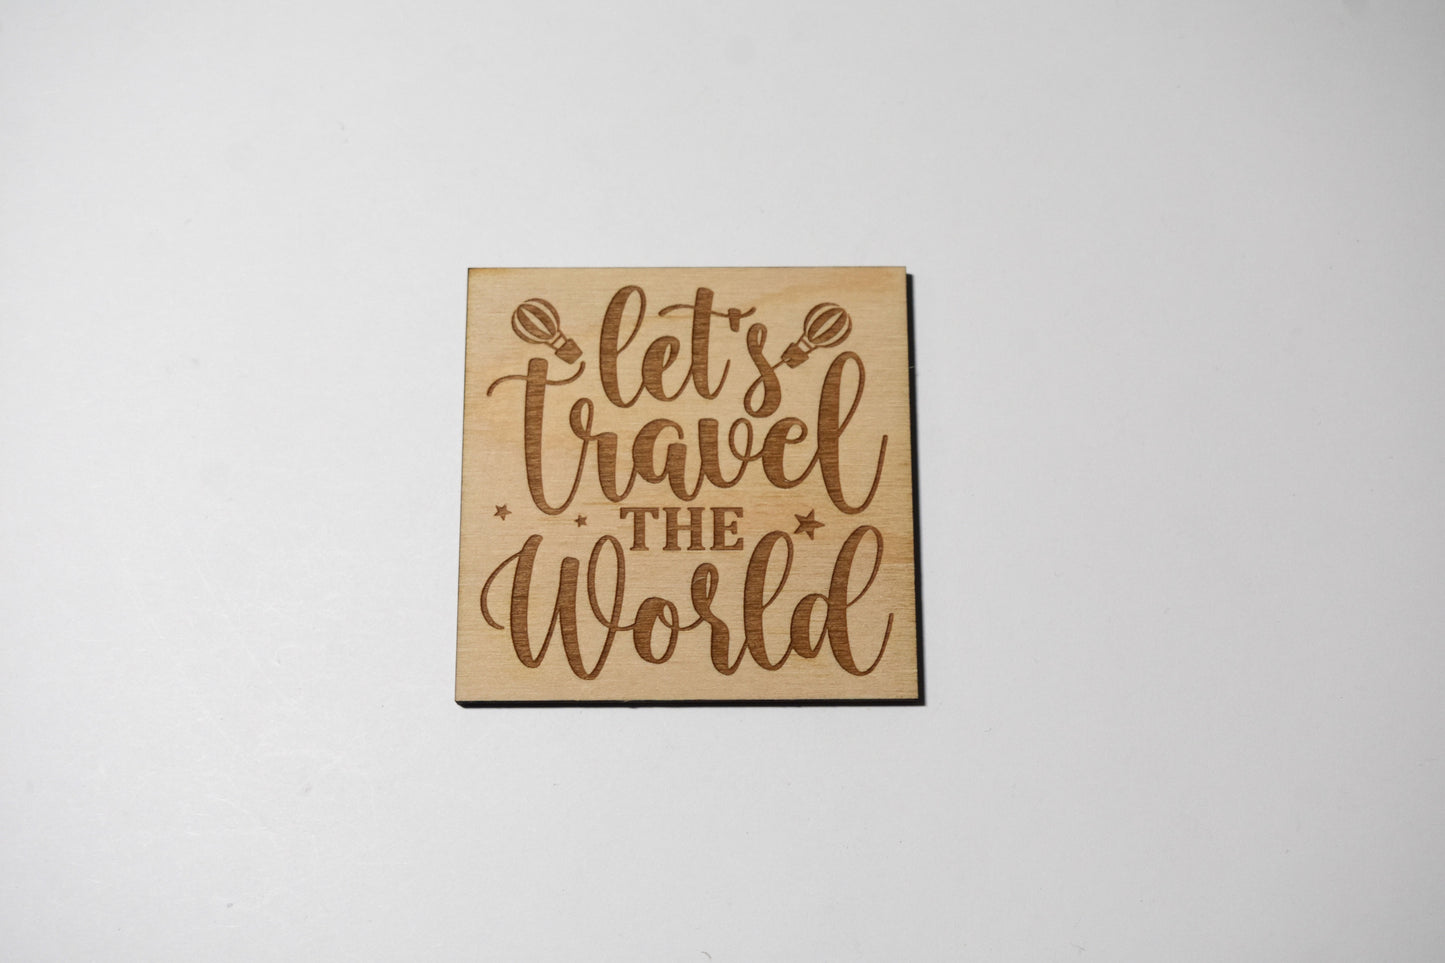 Let's travel the world - Creative Designs By Kari